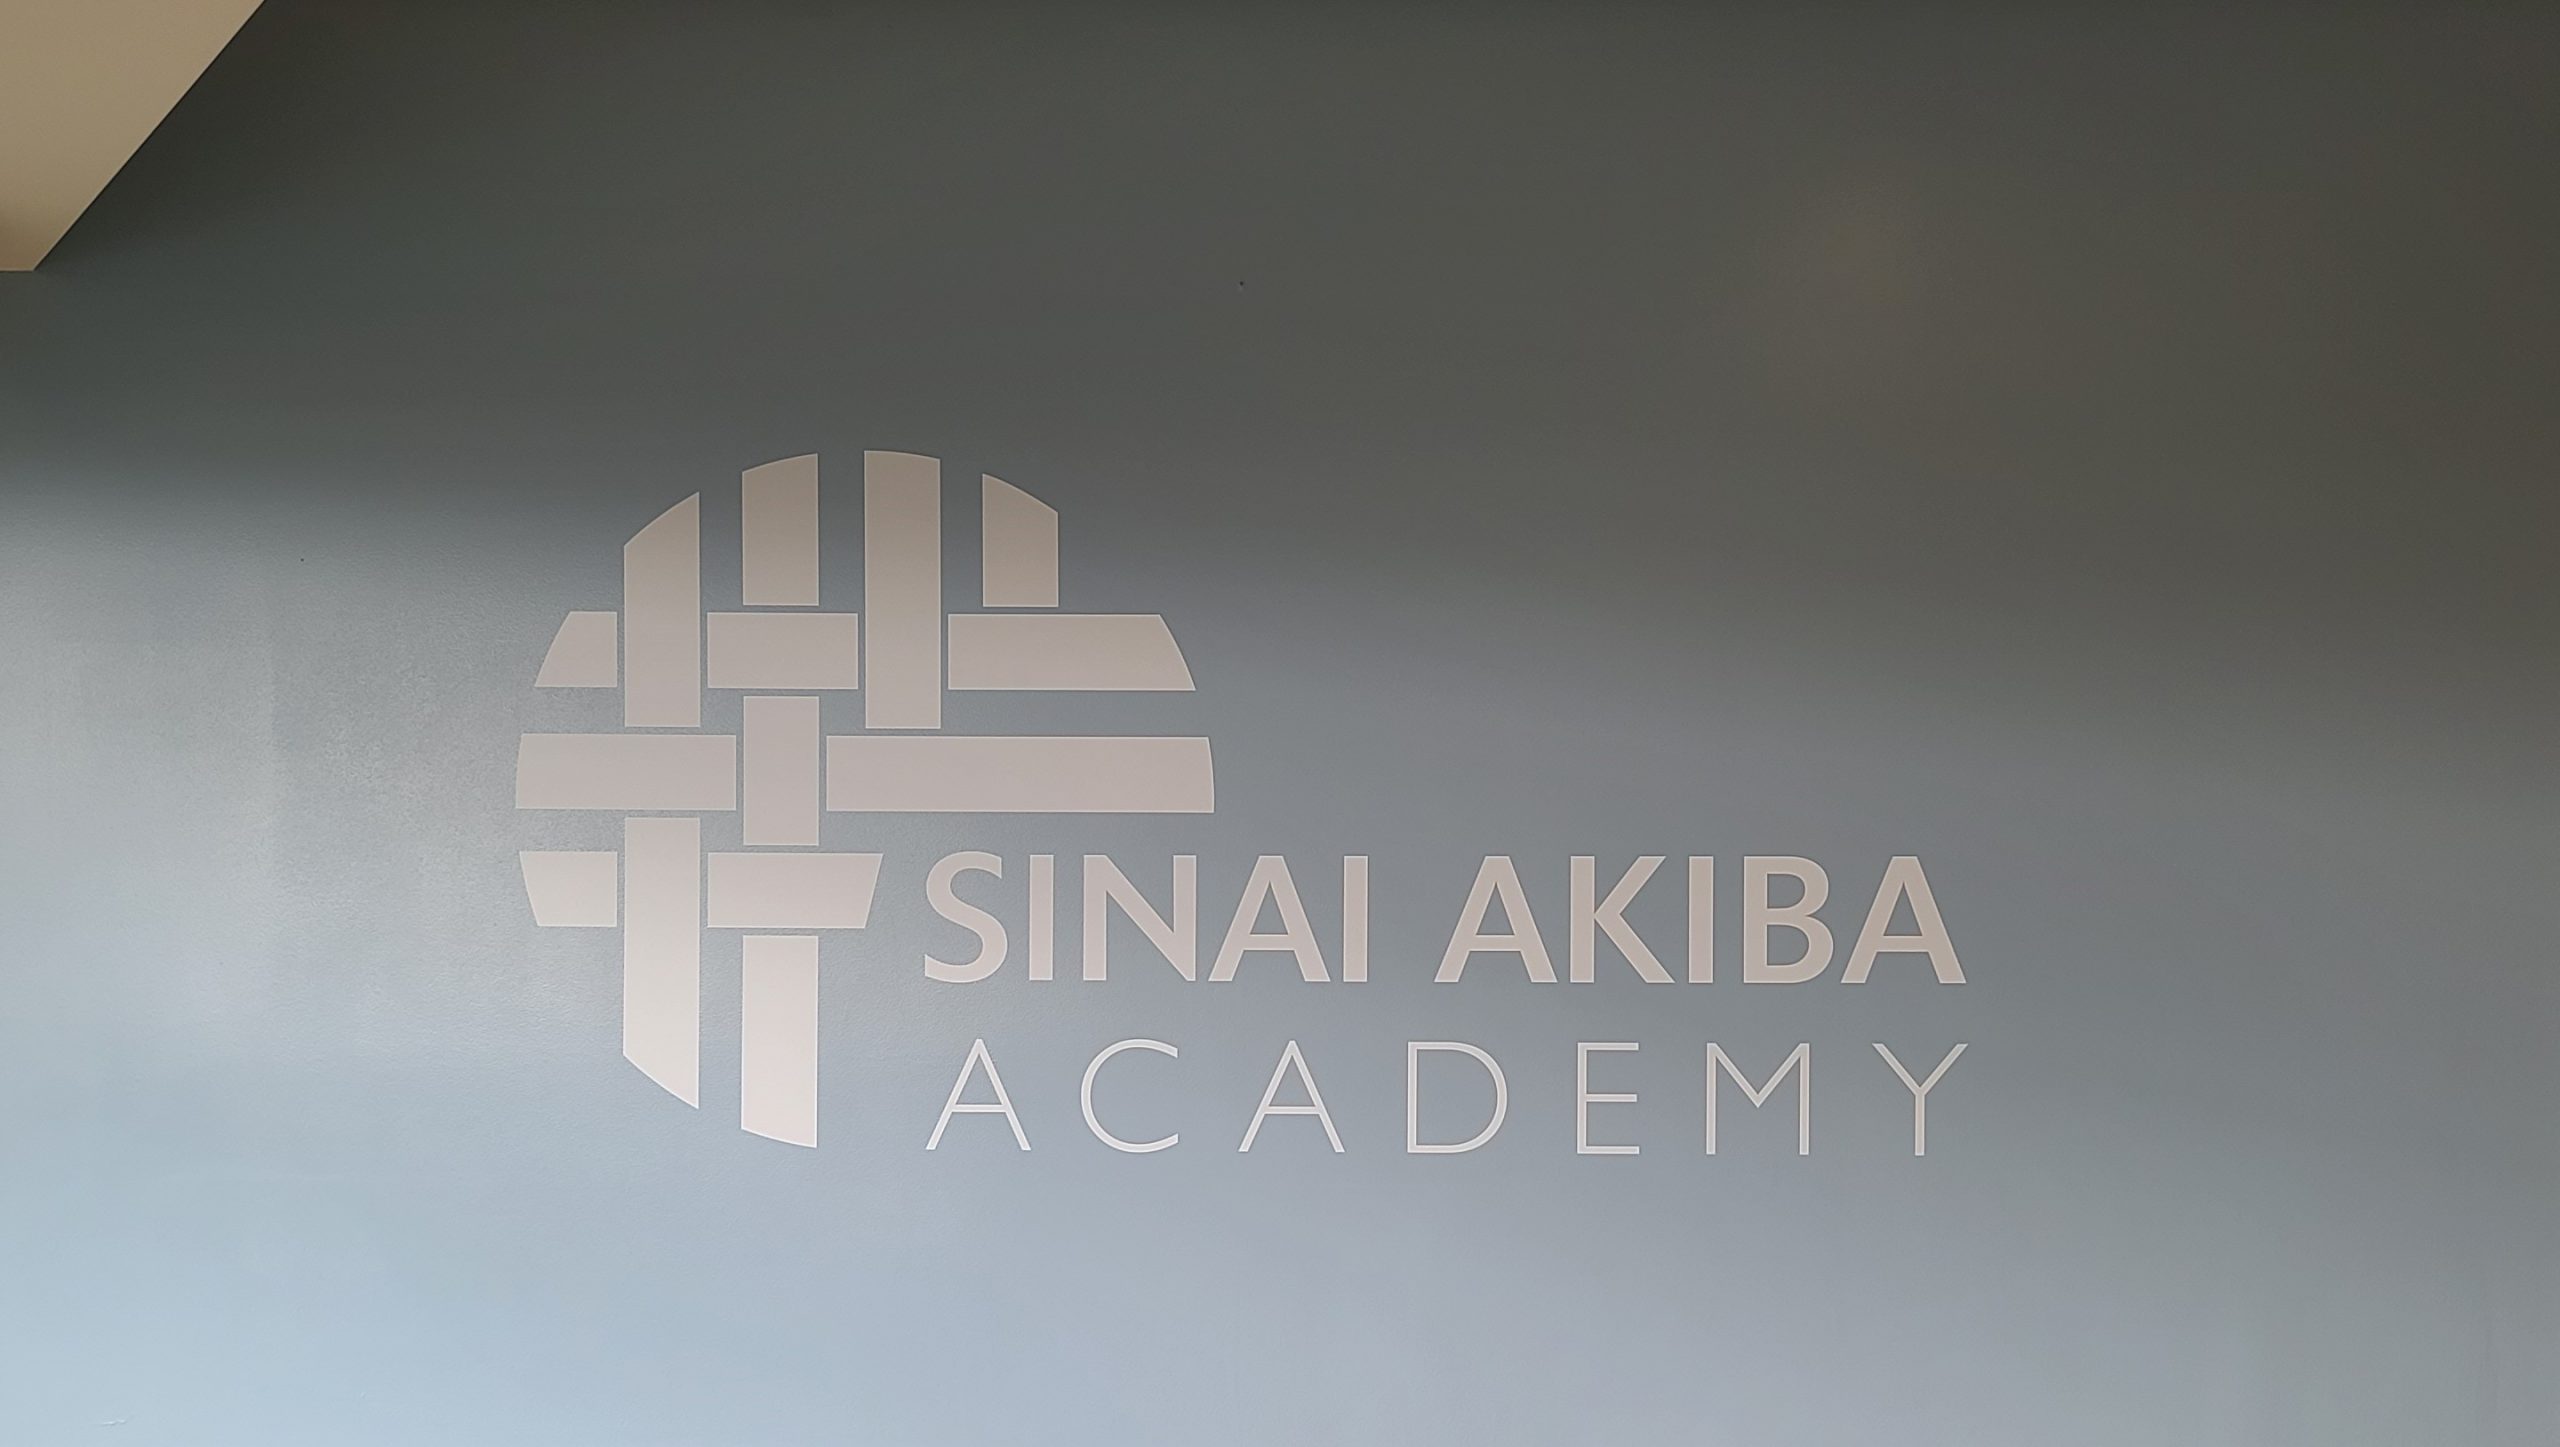 Schools display their brand to foster a sense of community and identity like the school wall graphics we installed for Sinai Akiba Academy in Los Angeles.